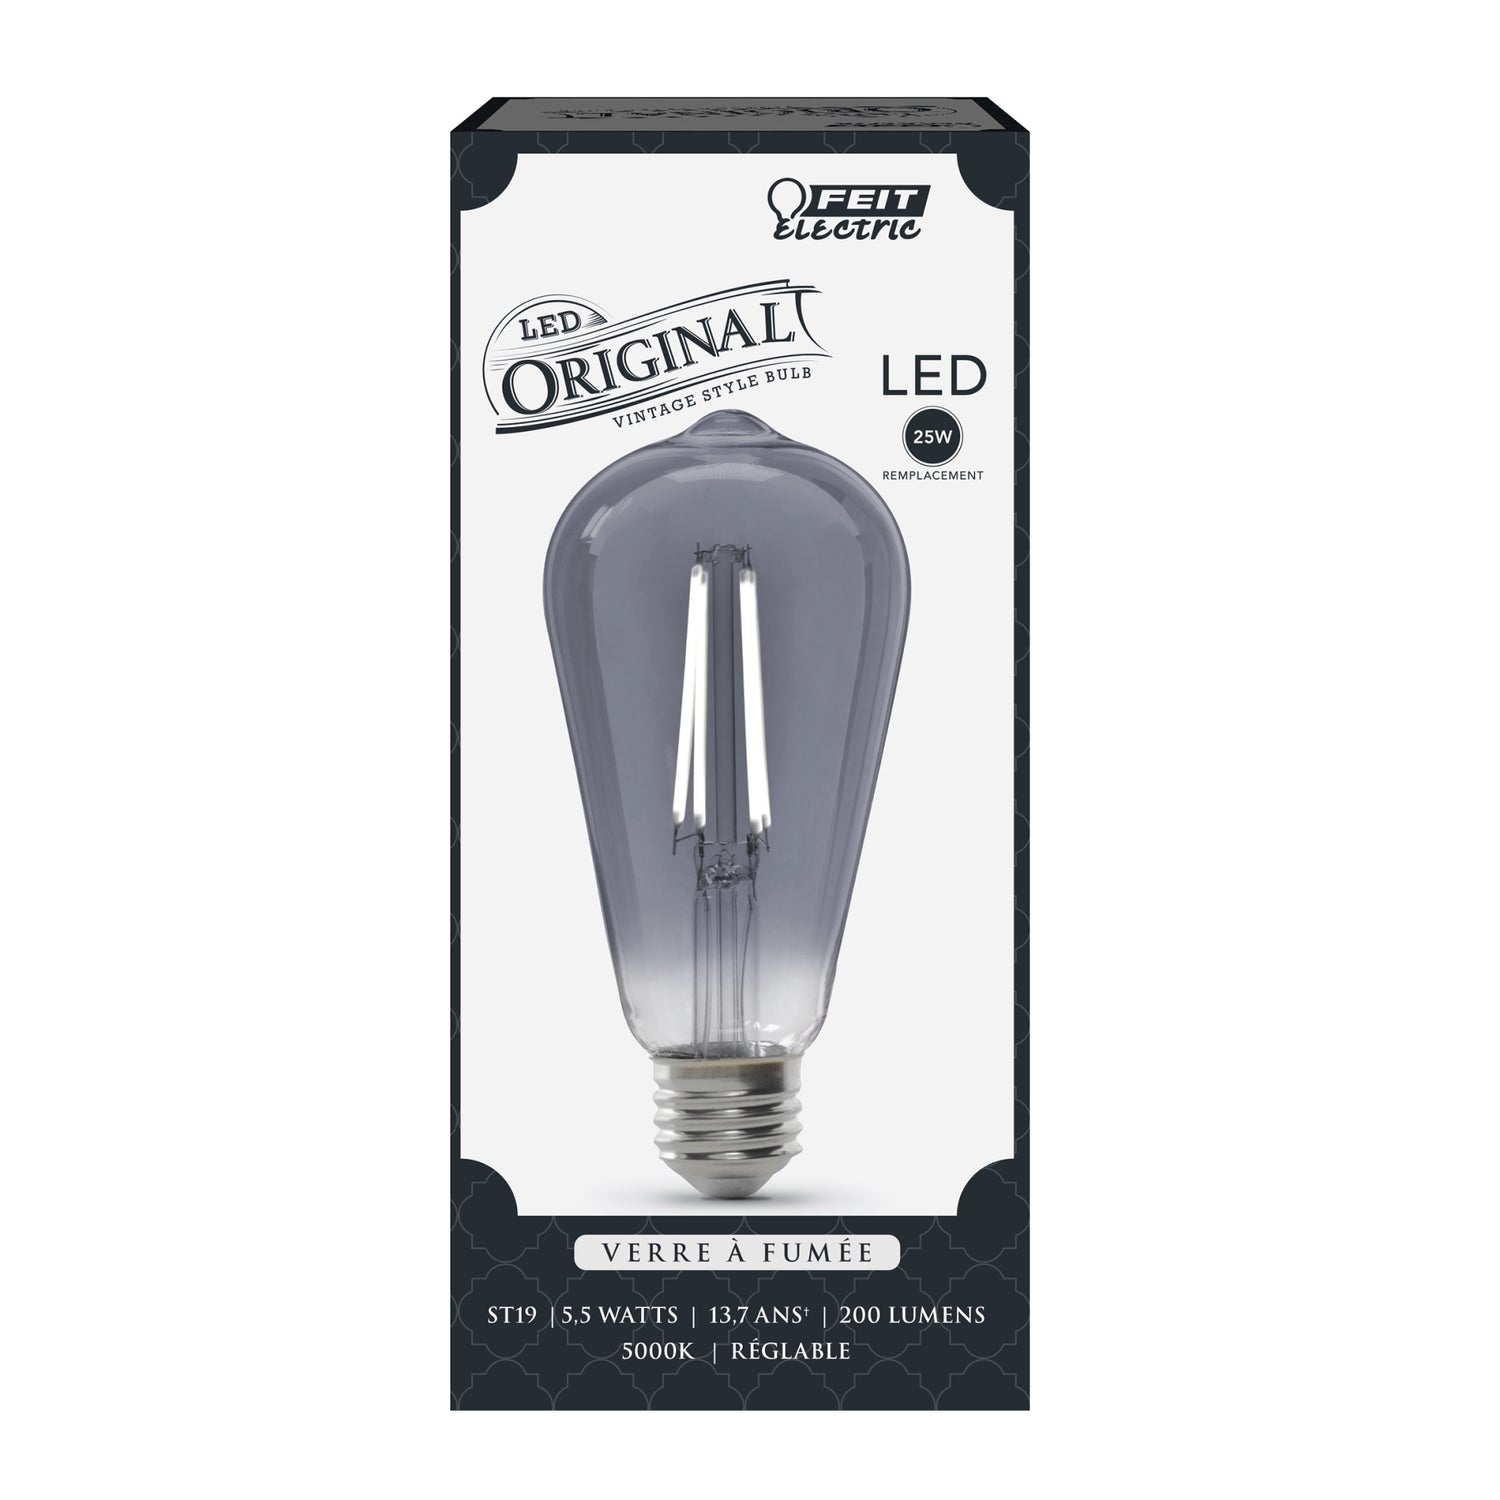 5.5W (25W Replacement) ST19 E26 Dimmable Straight Filament Smoke Glass Vintage Edison LED Light Bulb, Daylight